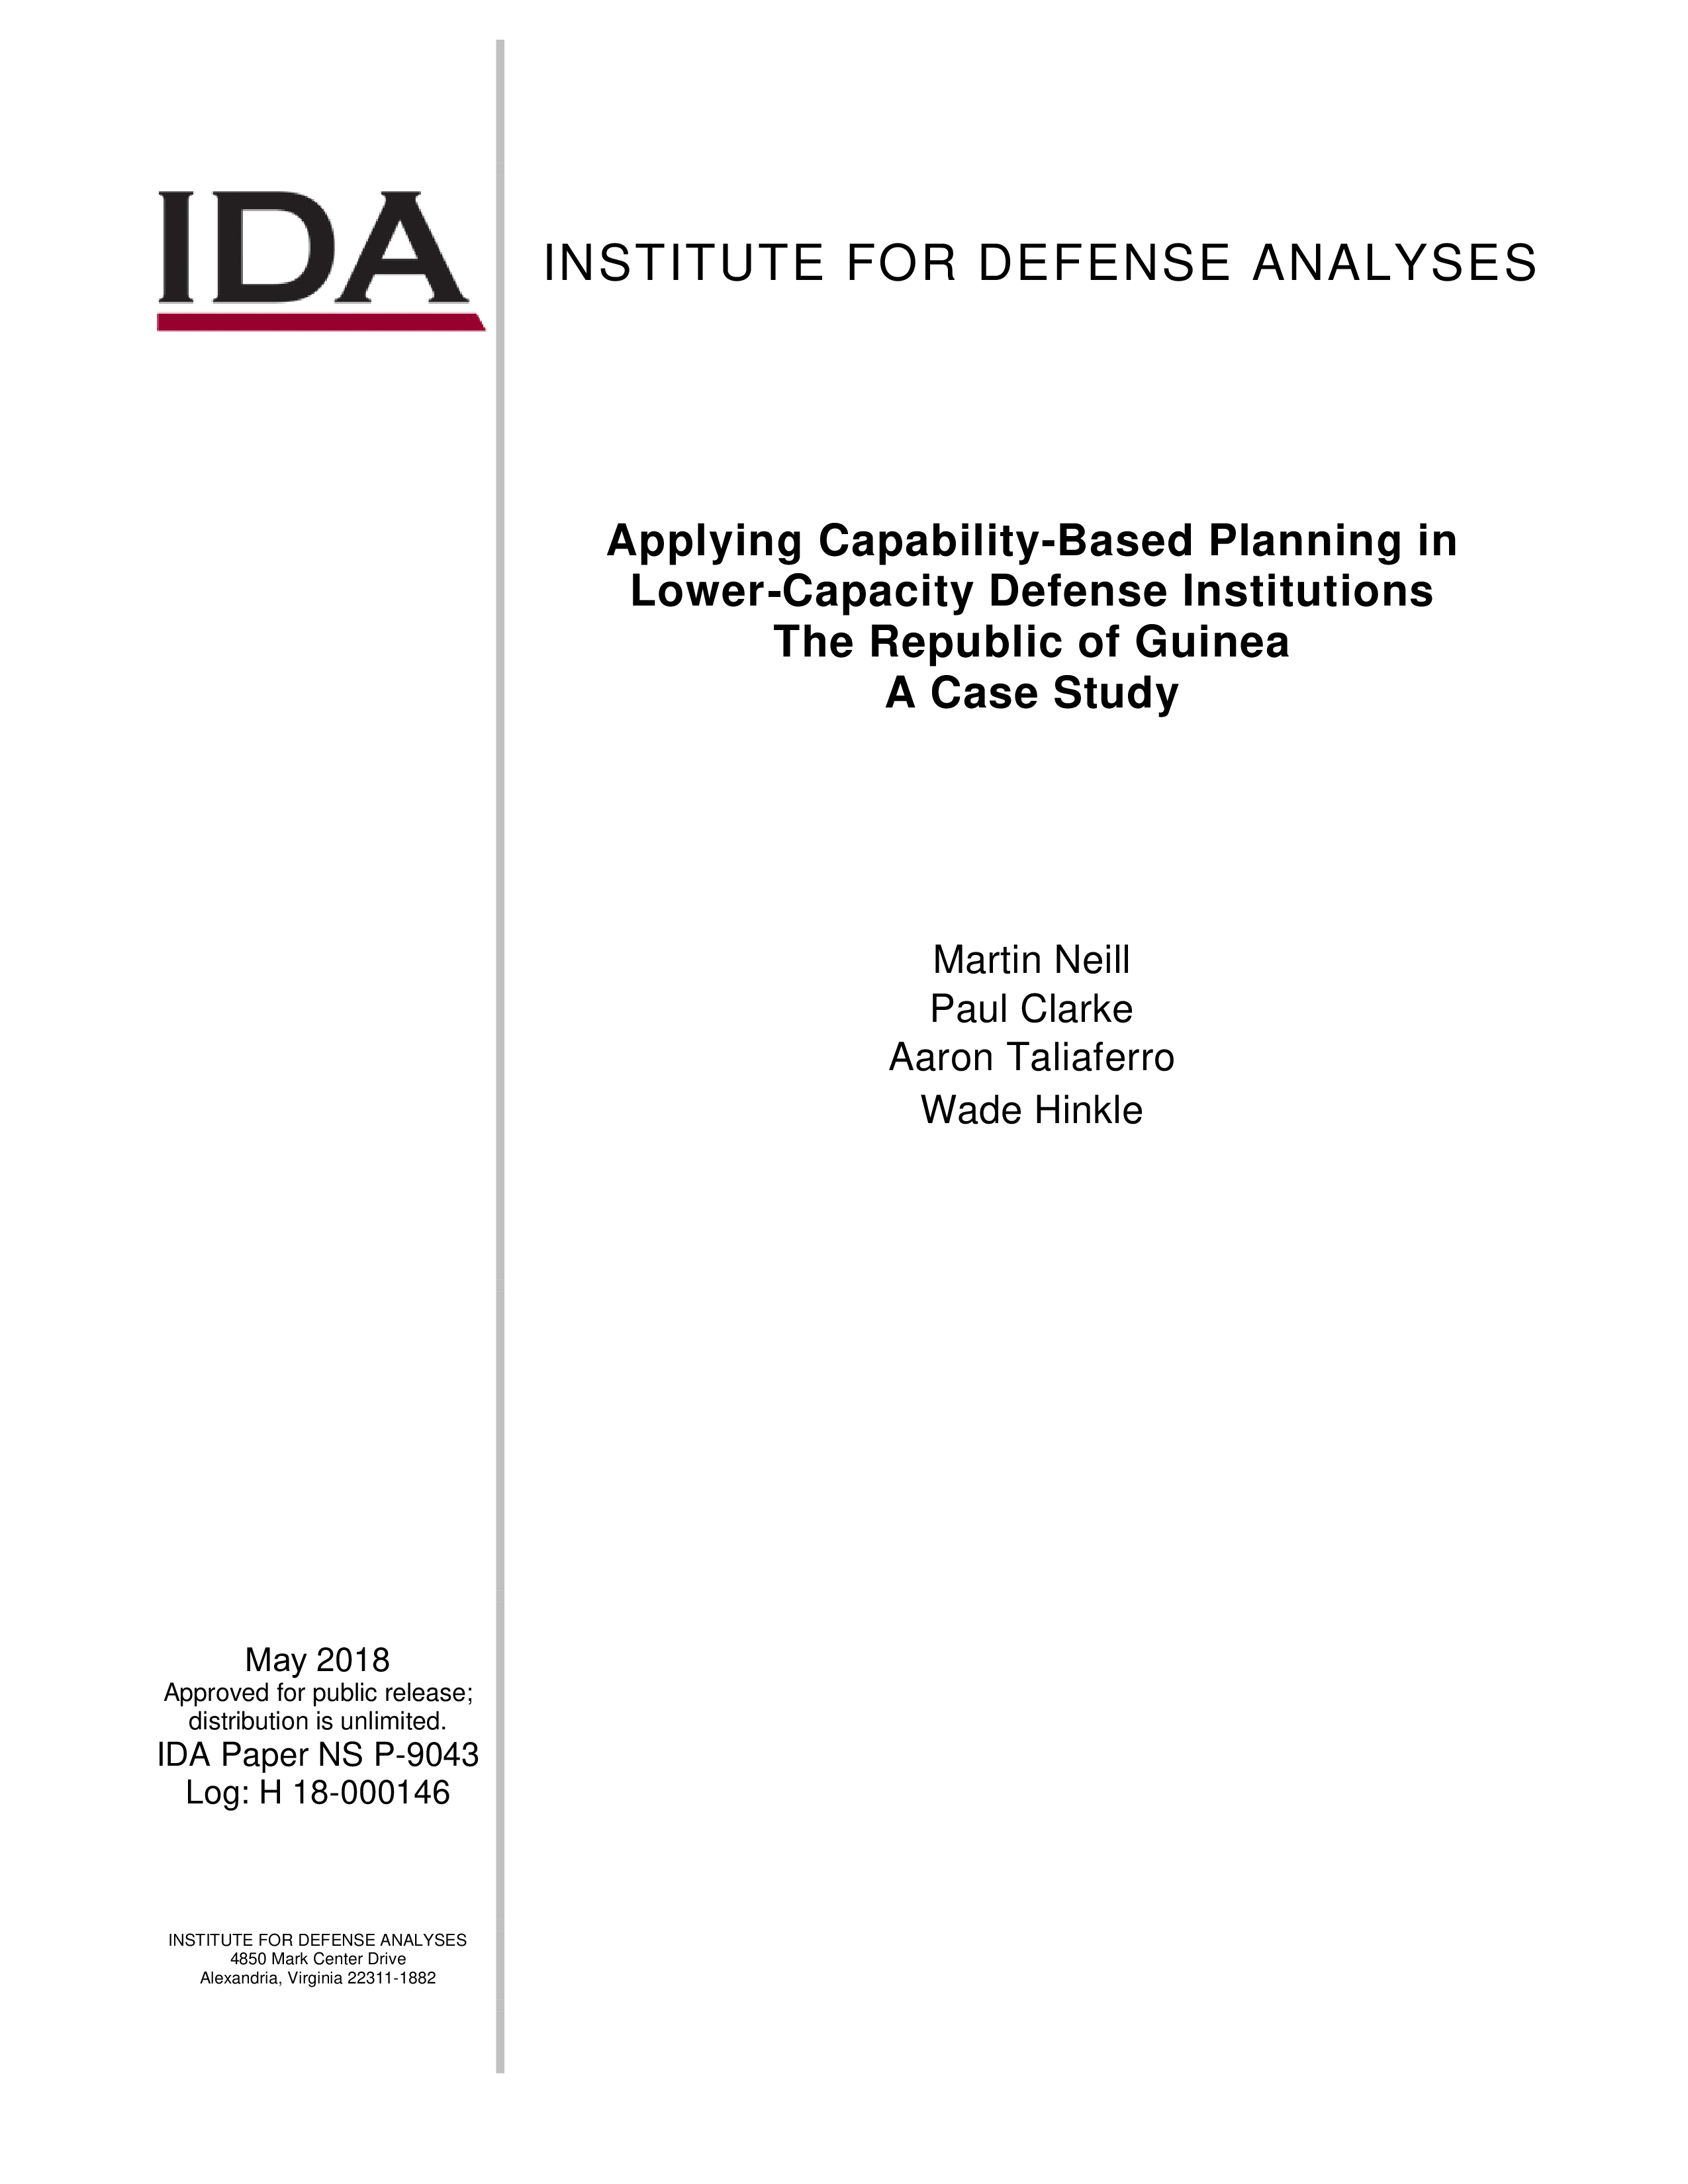 Applying Capability-Based Planning in Lower-Capacity Defense Institutions – The Republic of Guinea: A Case Study